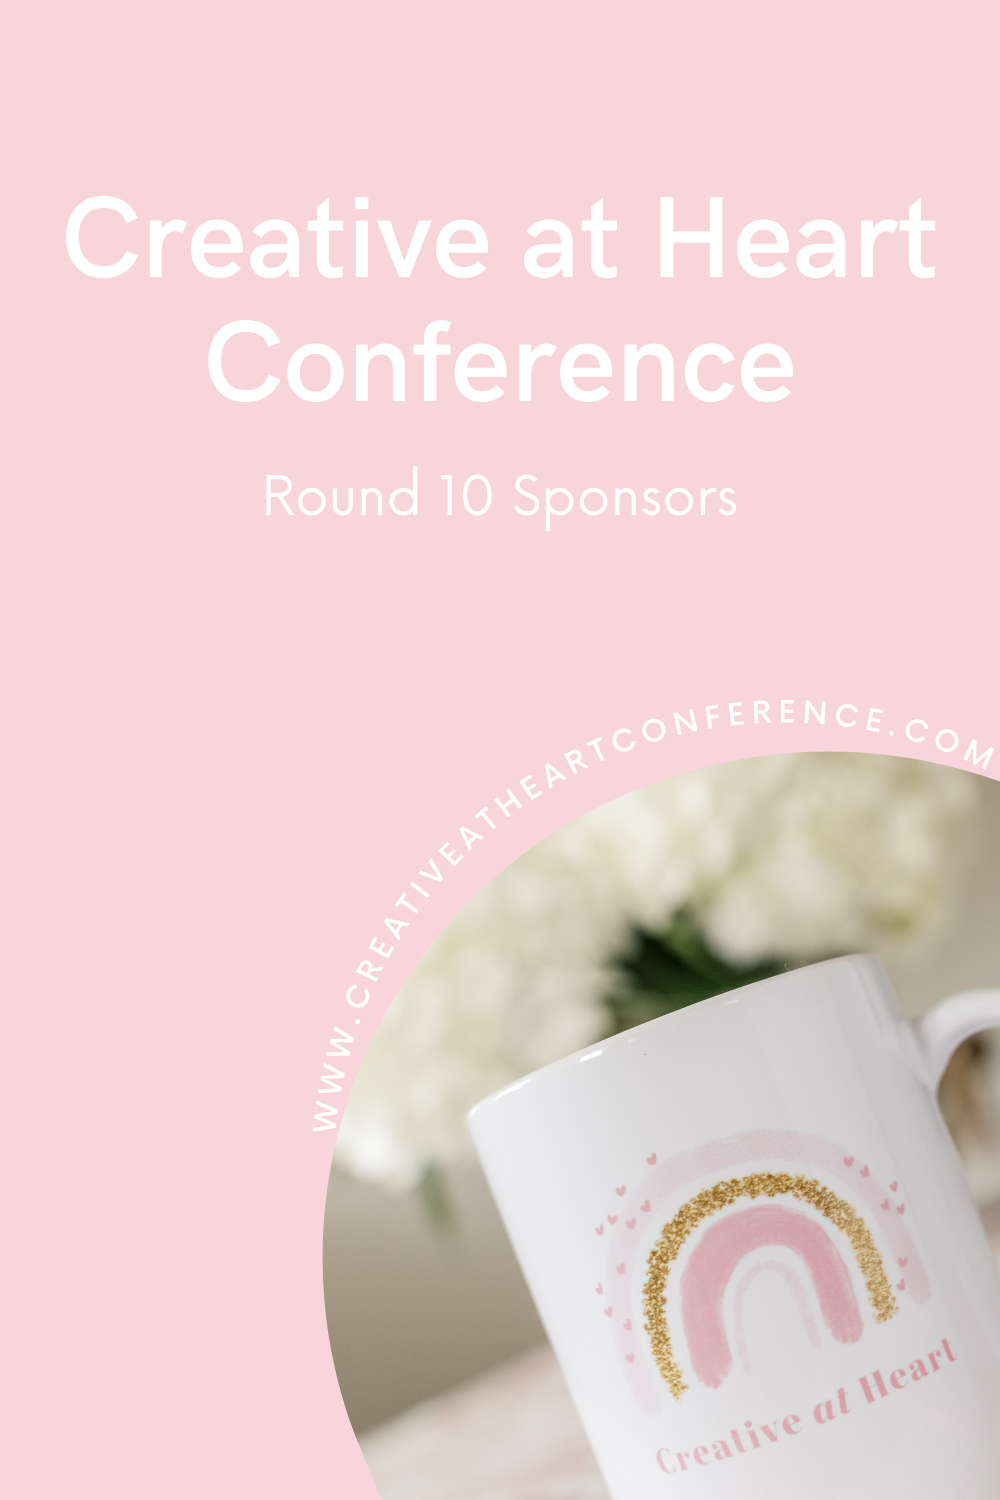 Creative at Heart Round 10 Sponsors: a look at sponsors, giveaways, and swag from C@H round 10 including Stationery HQ, Showit, and other small businesses